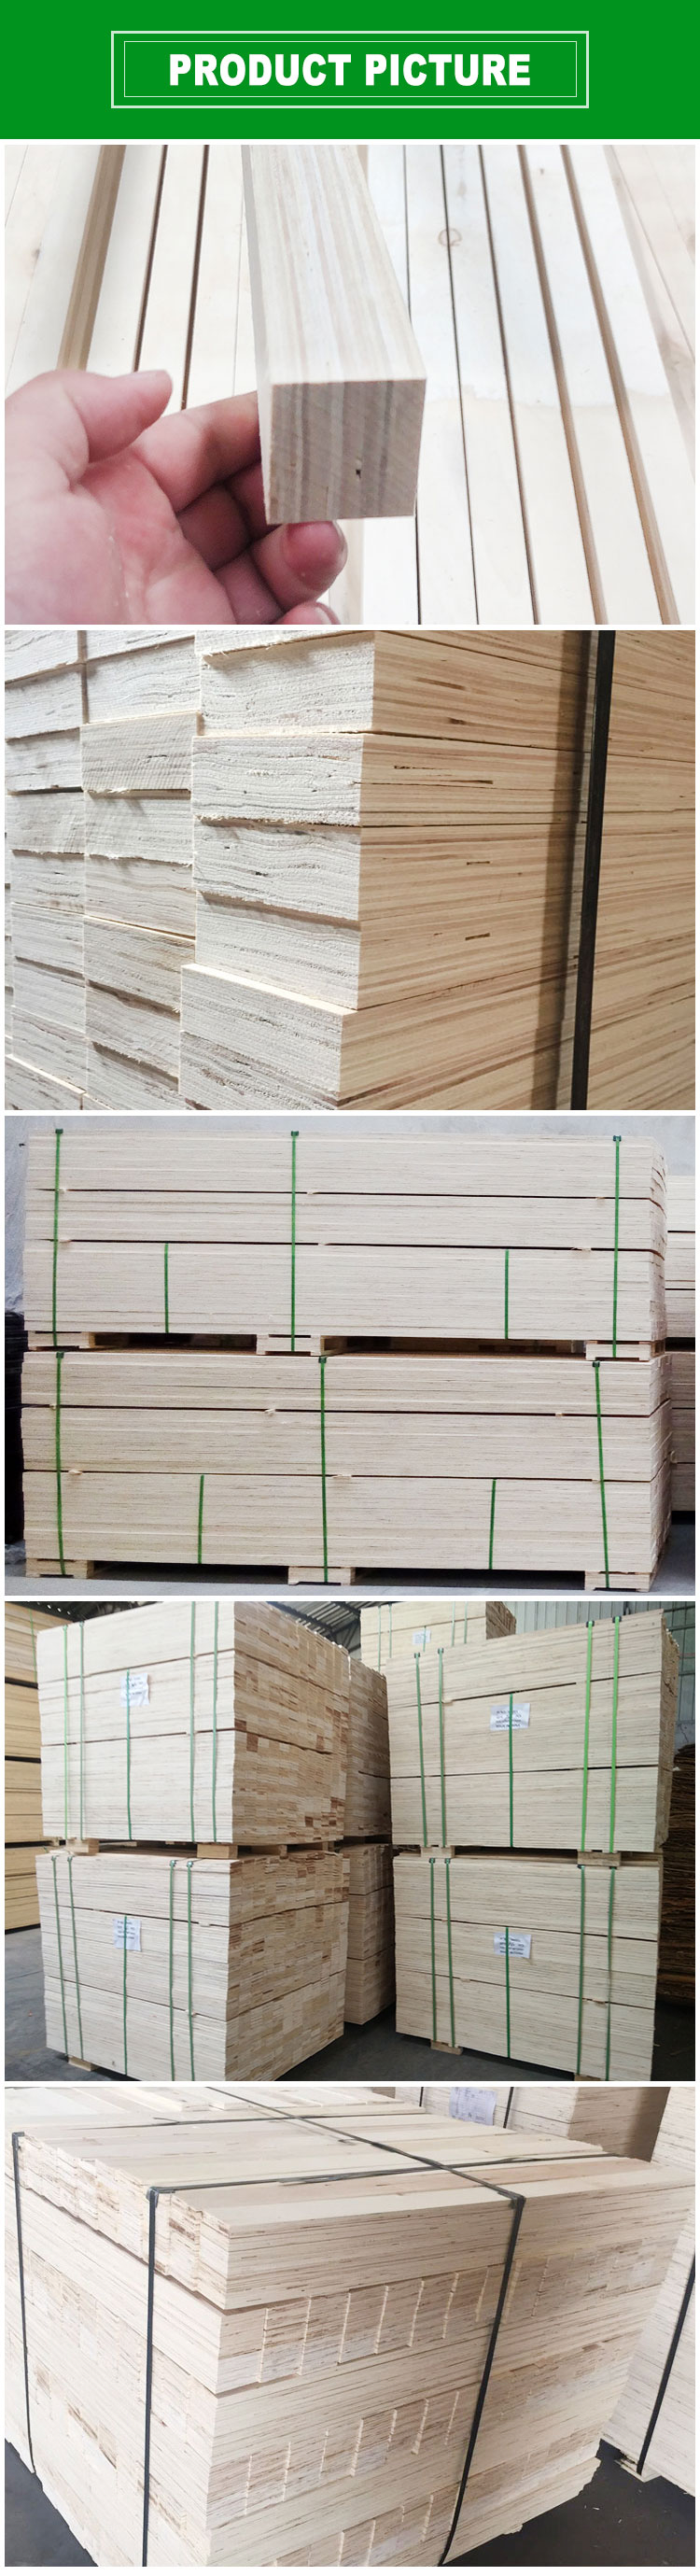 sanding surface LVL timber at facotry price(图1)